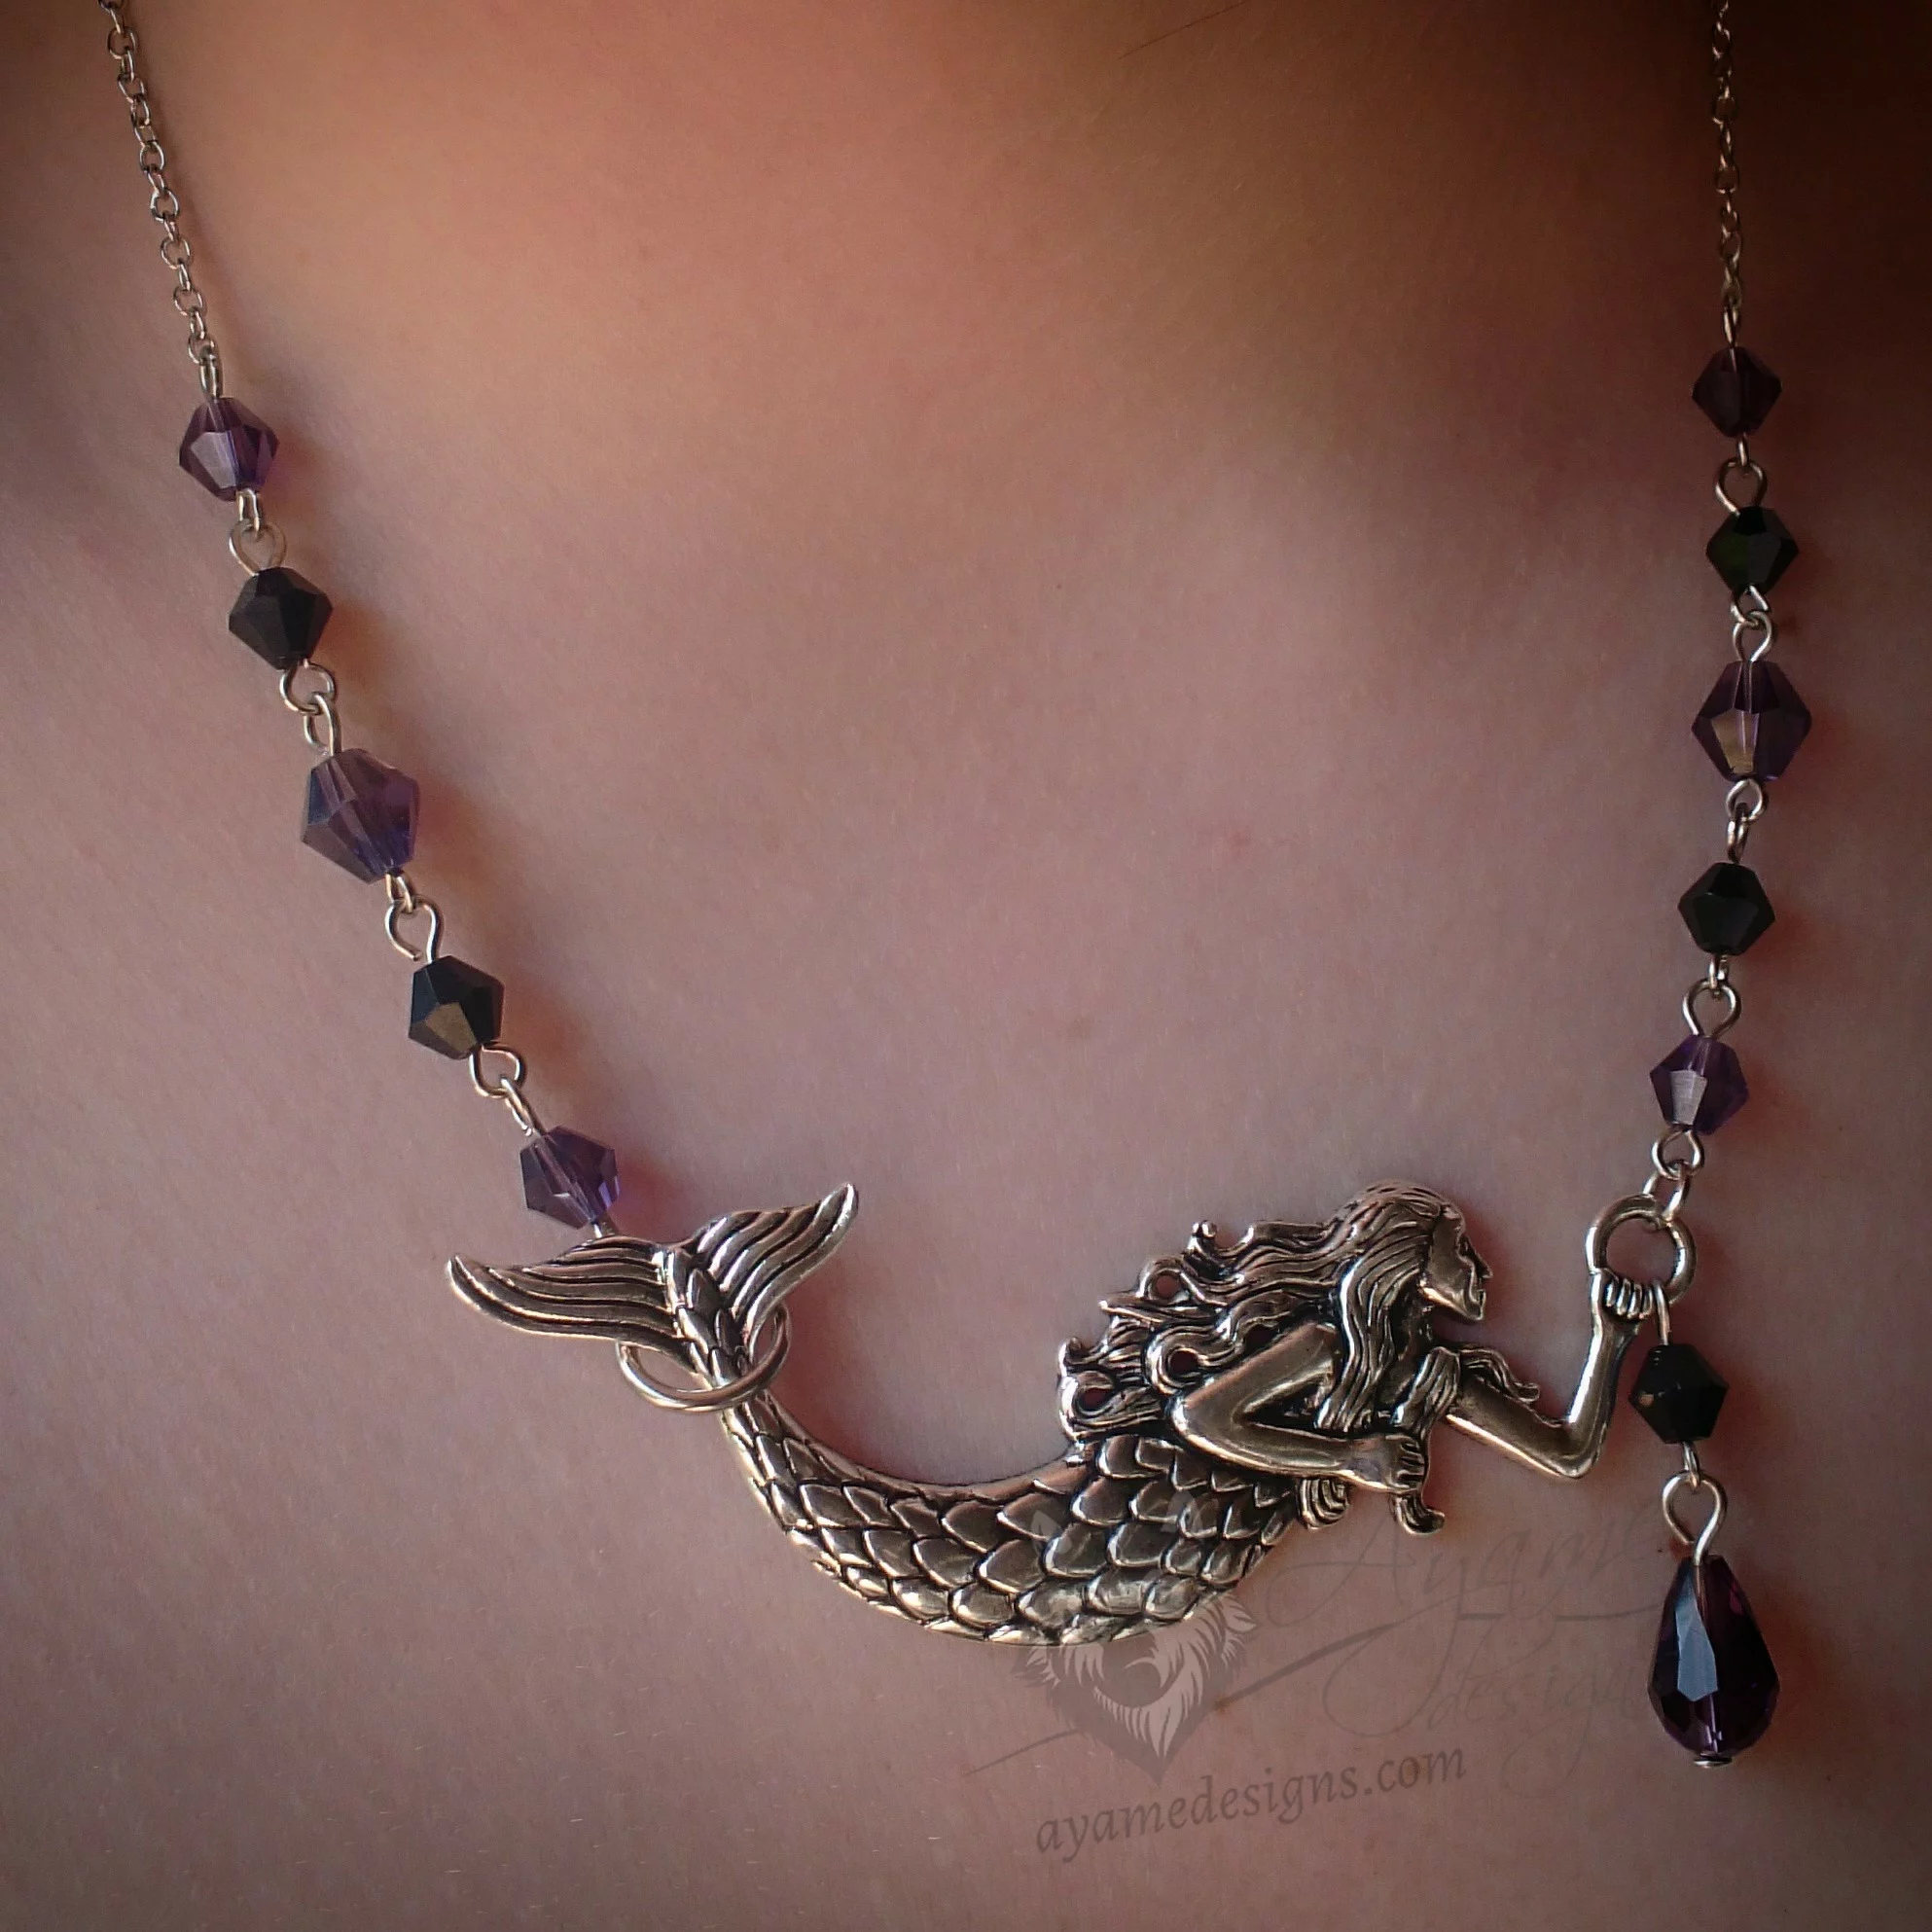 Adjustable fantasy necklace with a large mermaid pendant and black and purple Austrian crystal beads